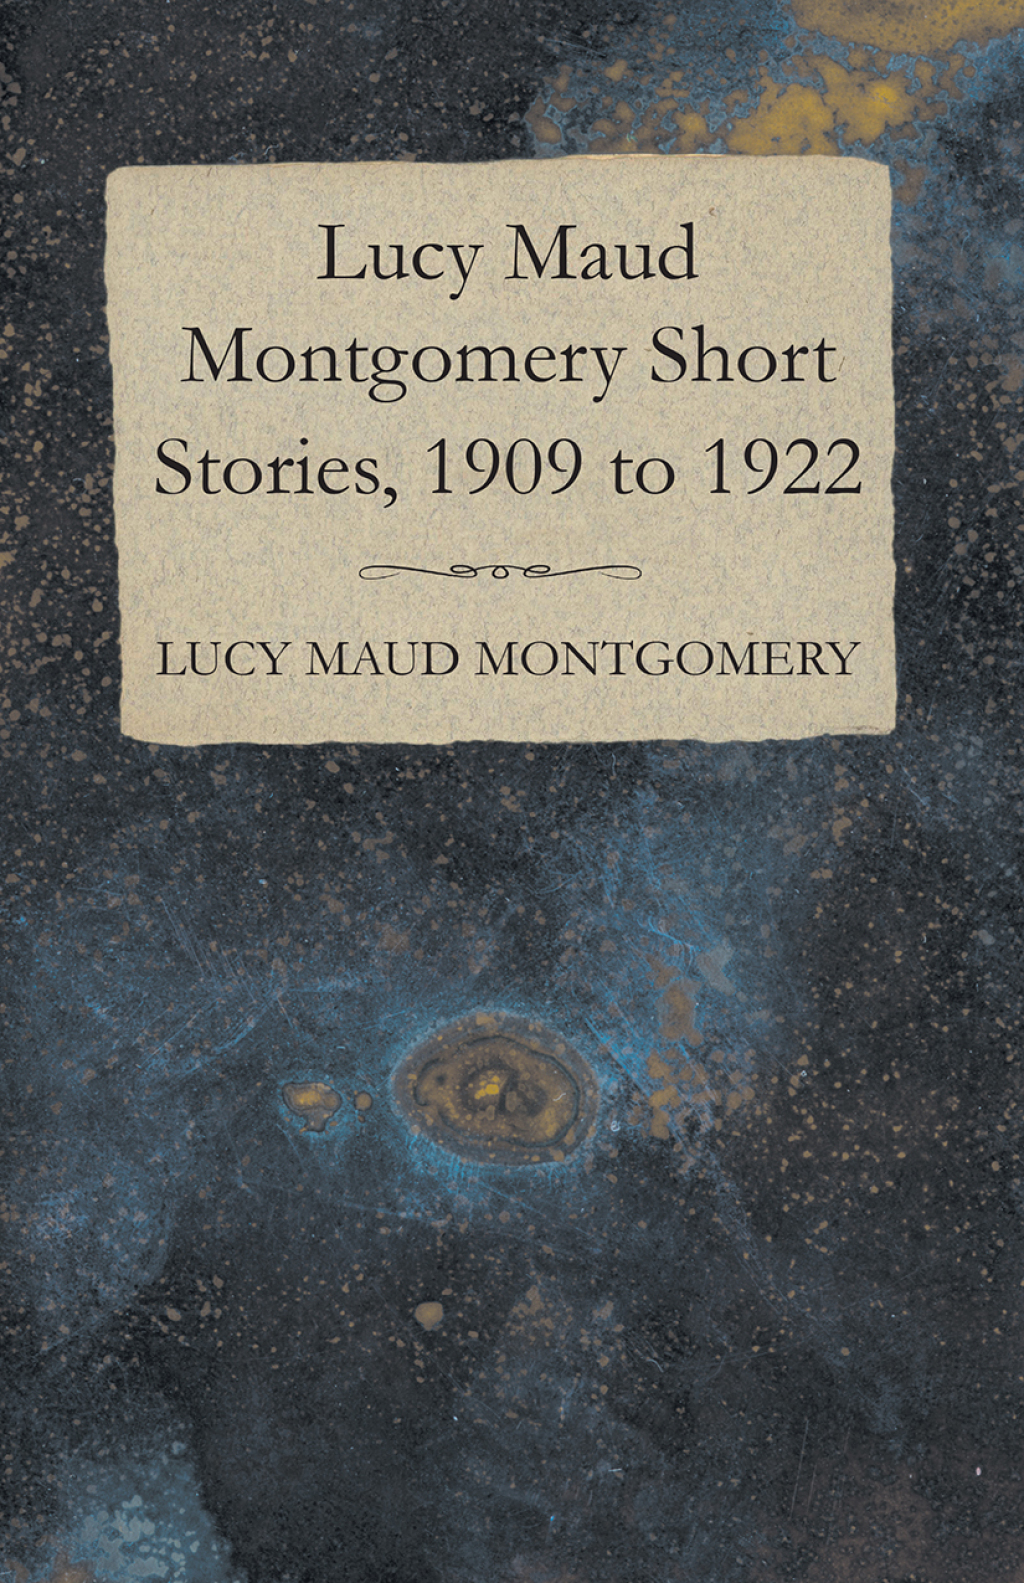 Lucy Maud Montgomery Short Stories  1909 to 1922 (eBook) - Lucy Maud Montgomery,